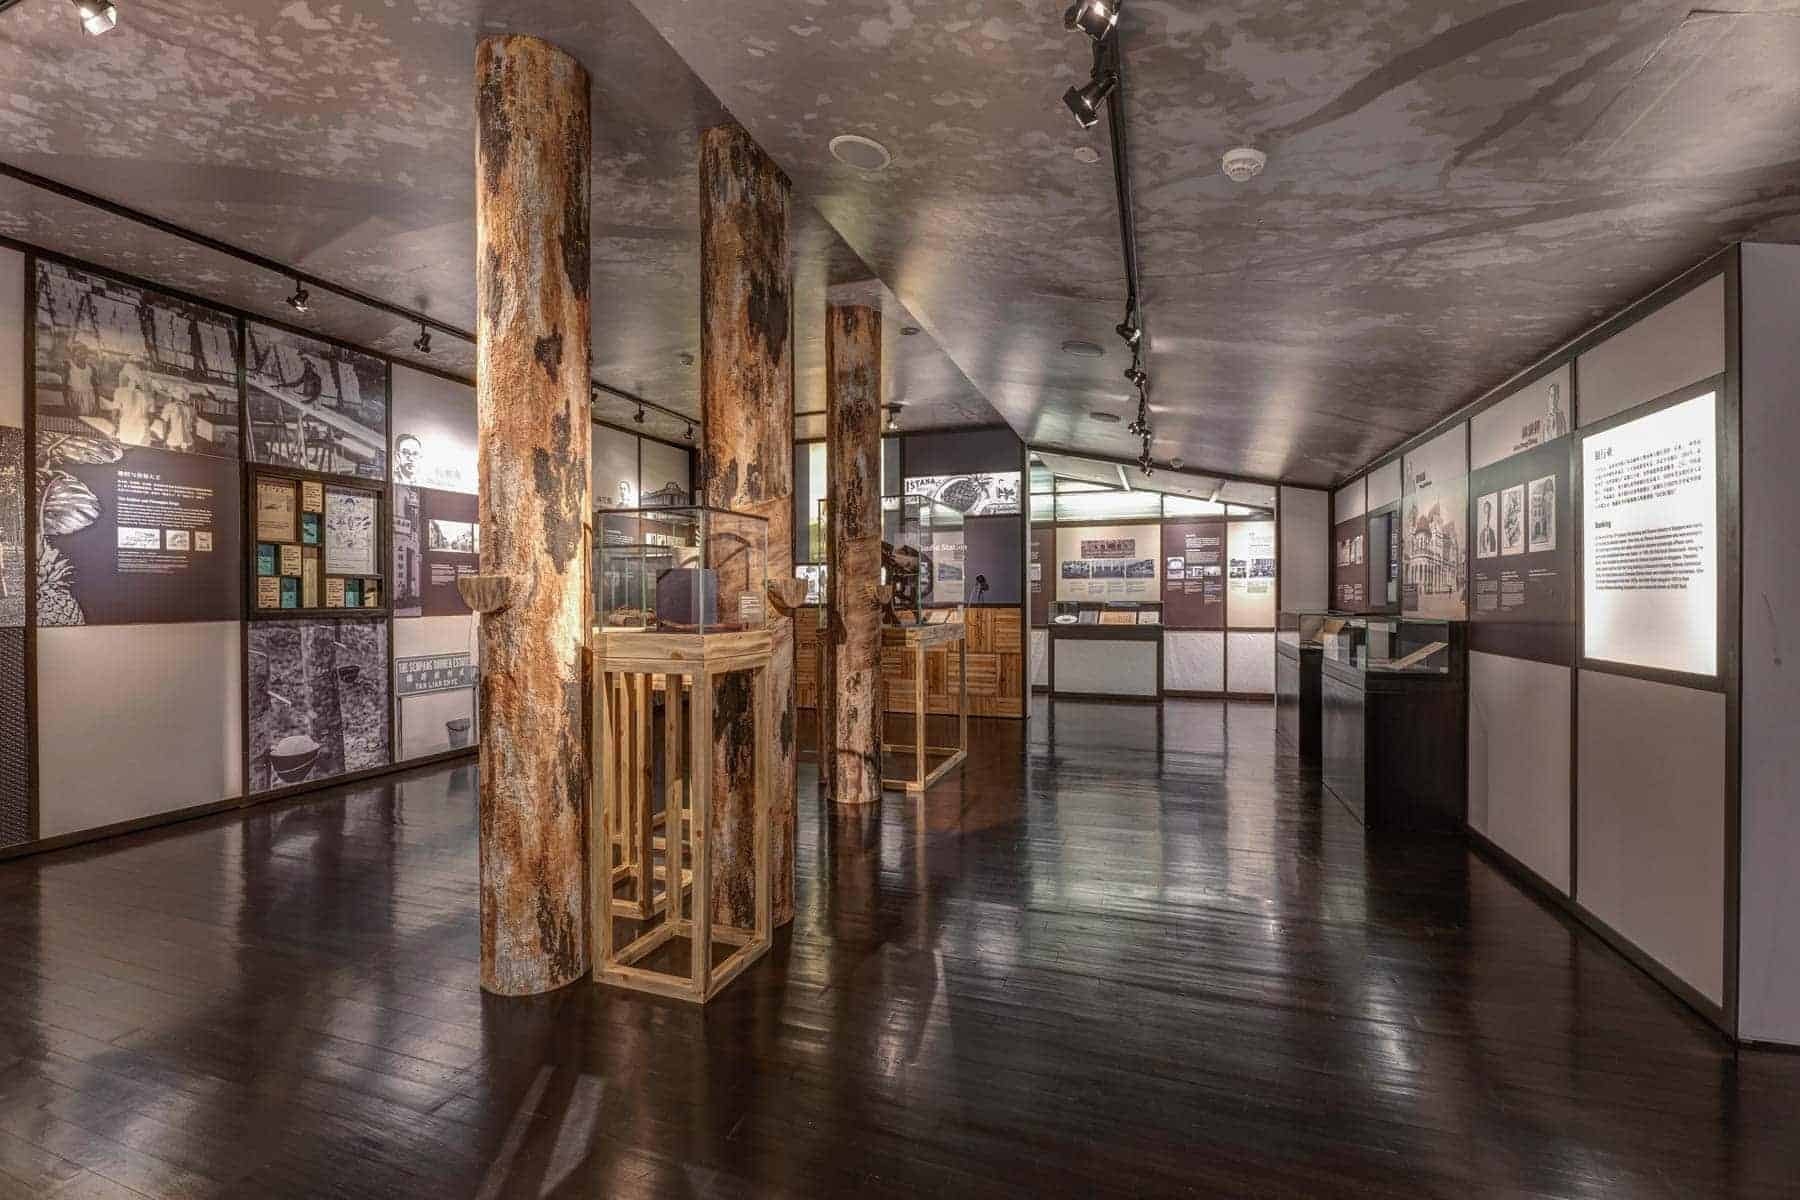 Singapore's Museum Design | Chinese Business Pioneers at the Sun Yat Sen Nanyang Memorial Hall designed by Gallagher & Associates Asia